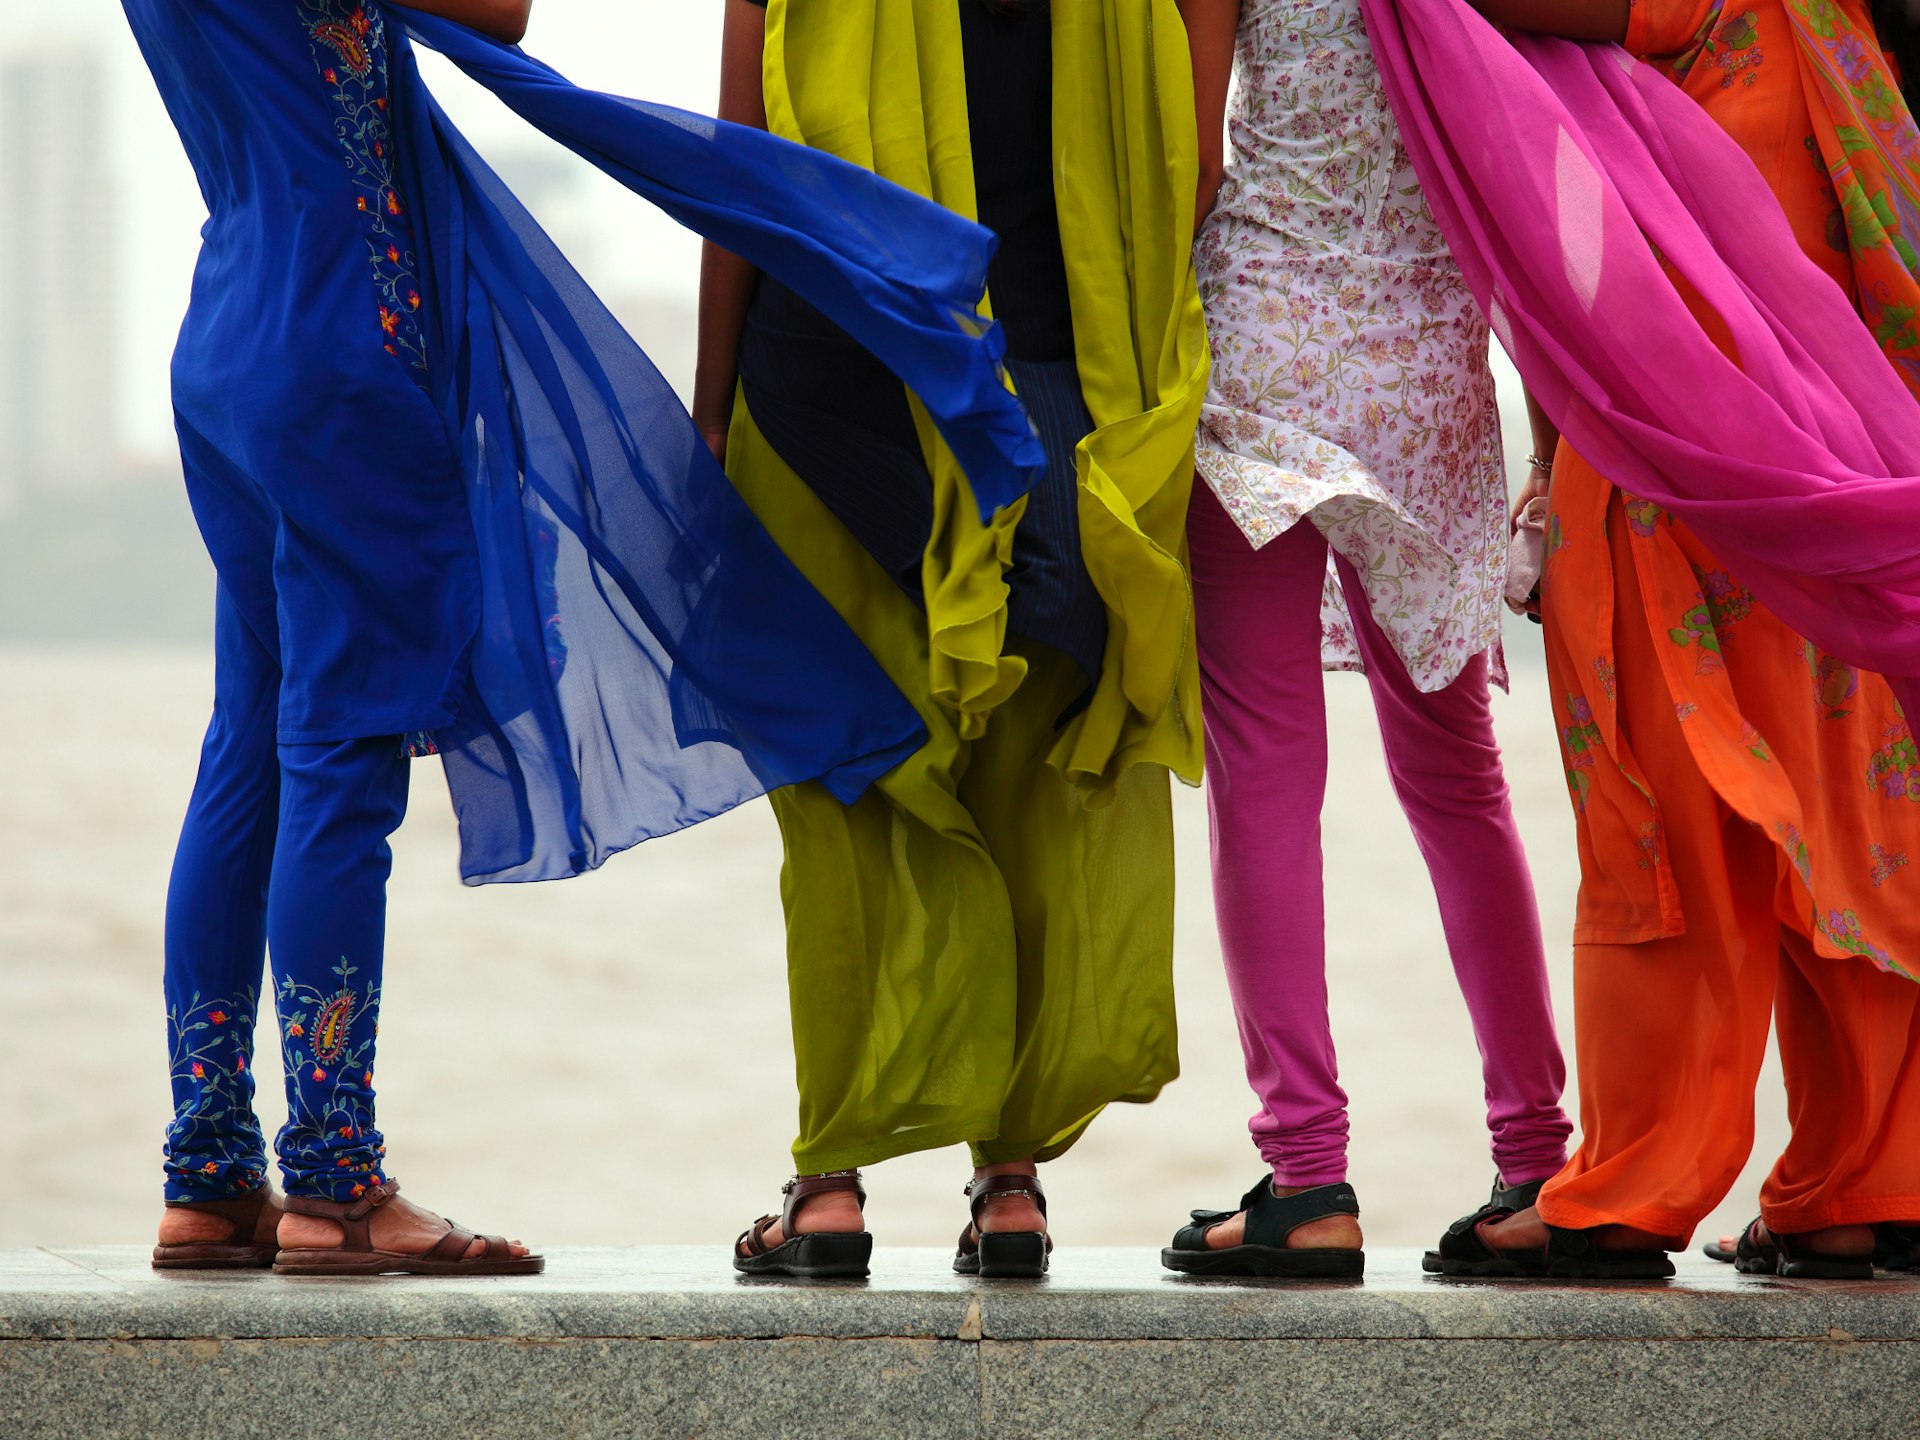 Fashionable threads on display on Marine Drive. Image by Yann LECOEUR / Getty Images